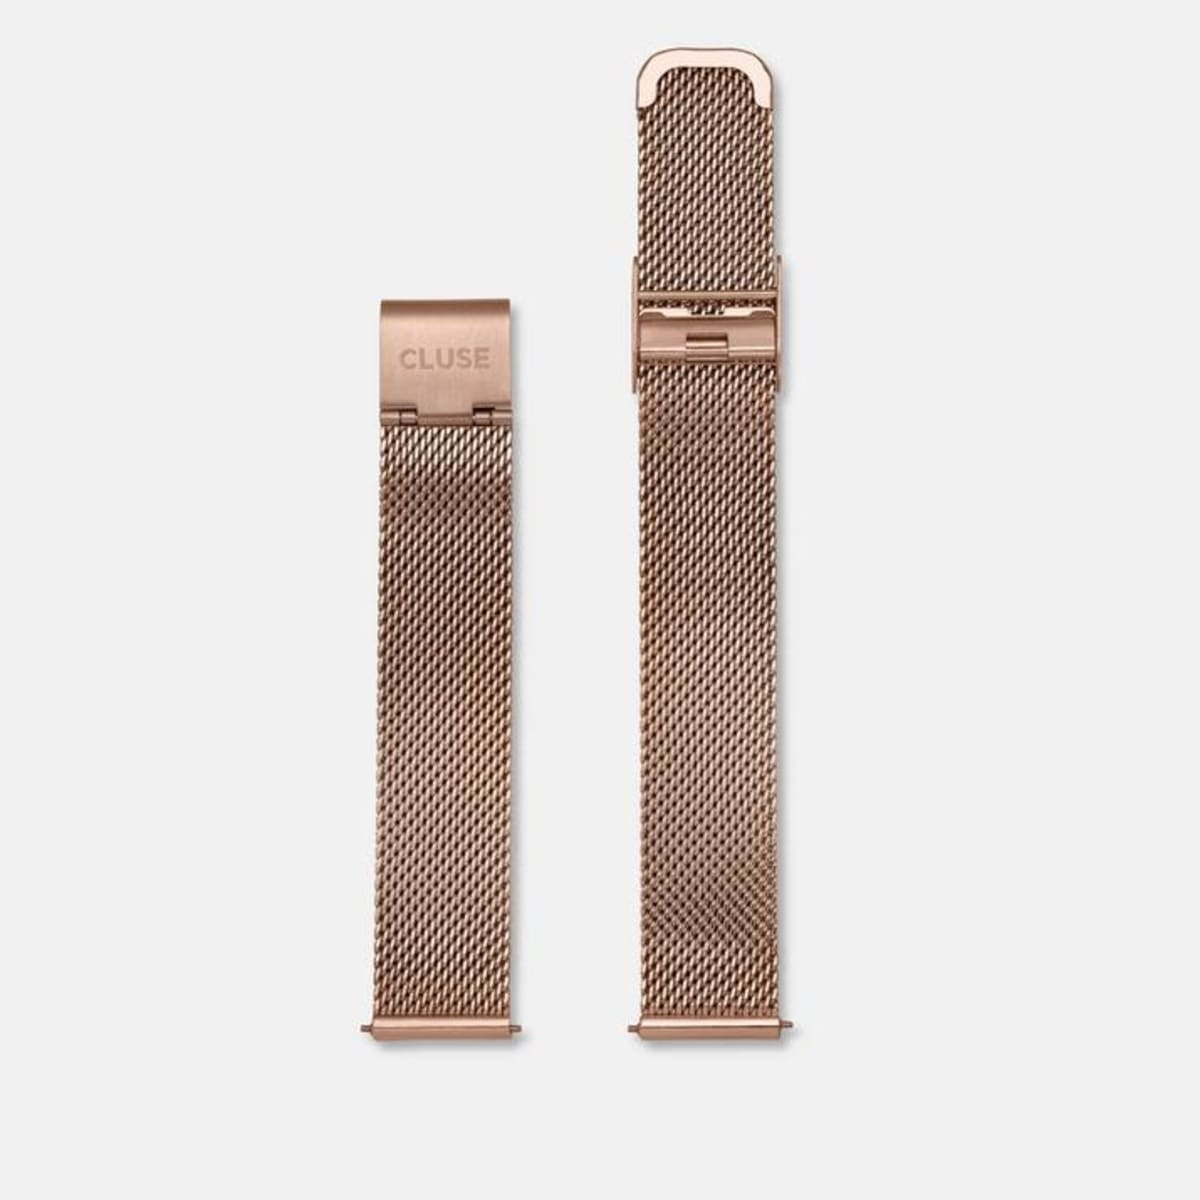 High quality rose gold stainless steel mesh strap (16 mm width). Equipped with an easy click on/off system. 